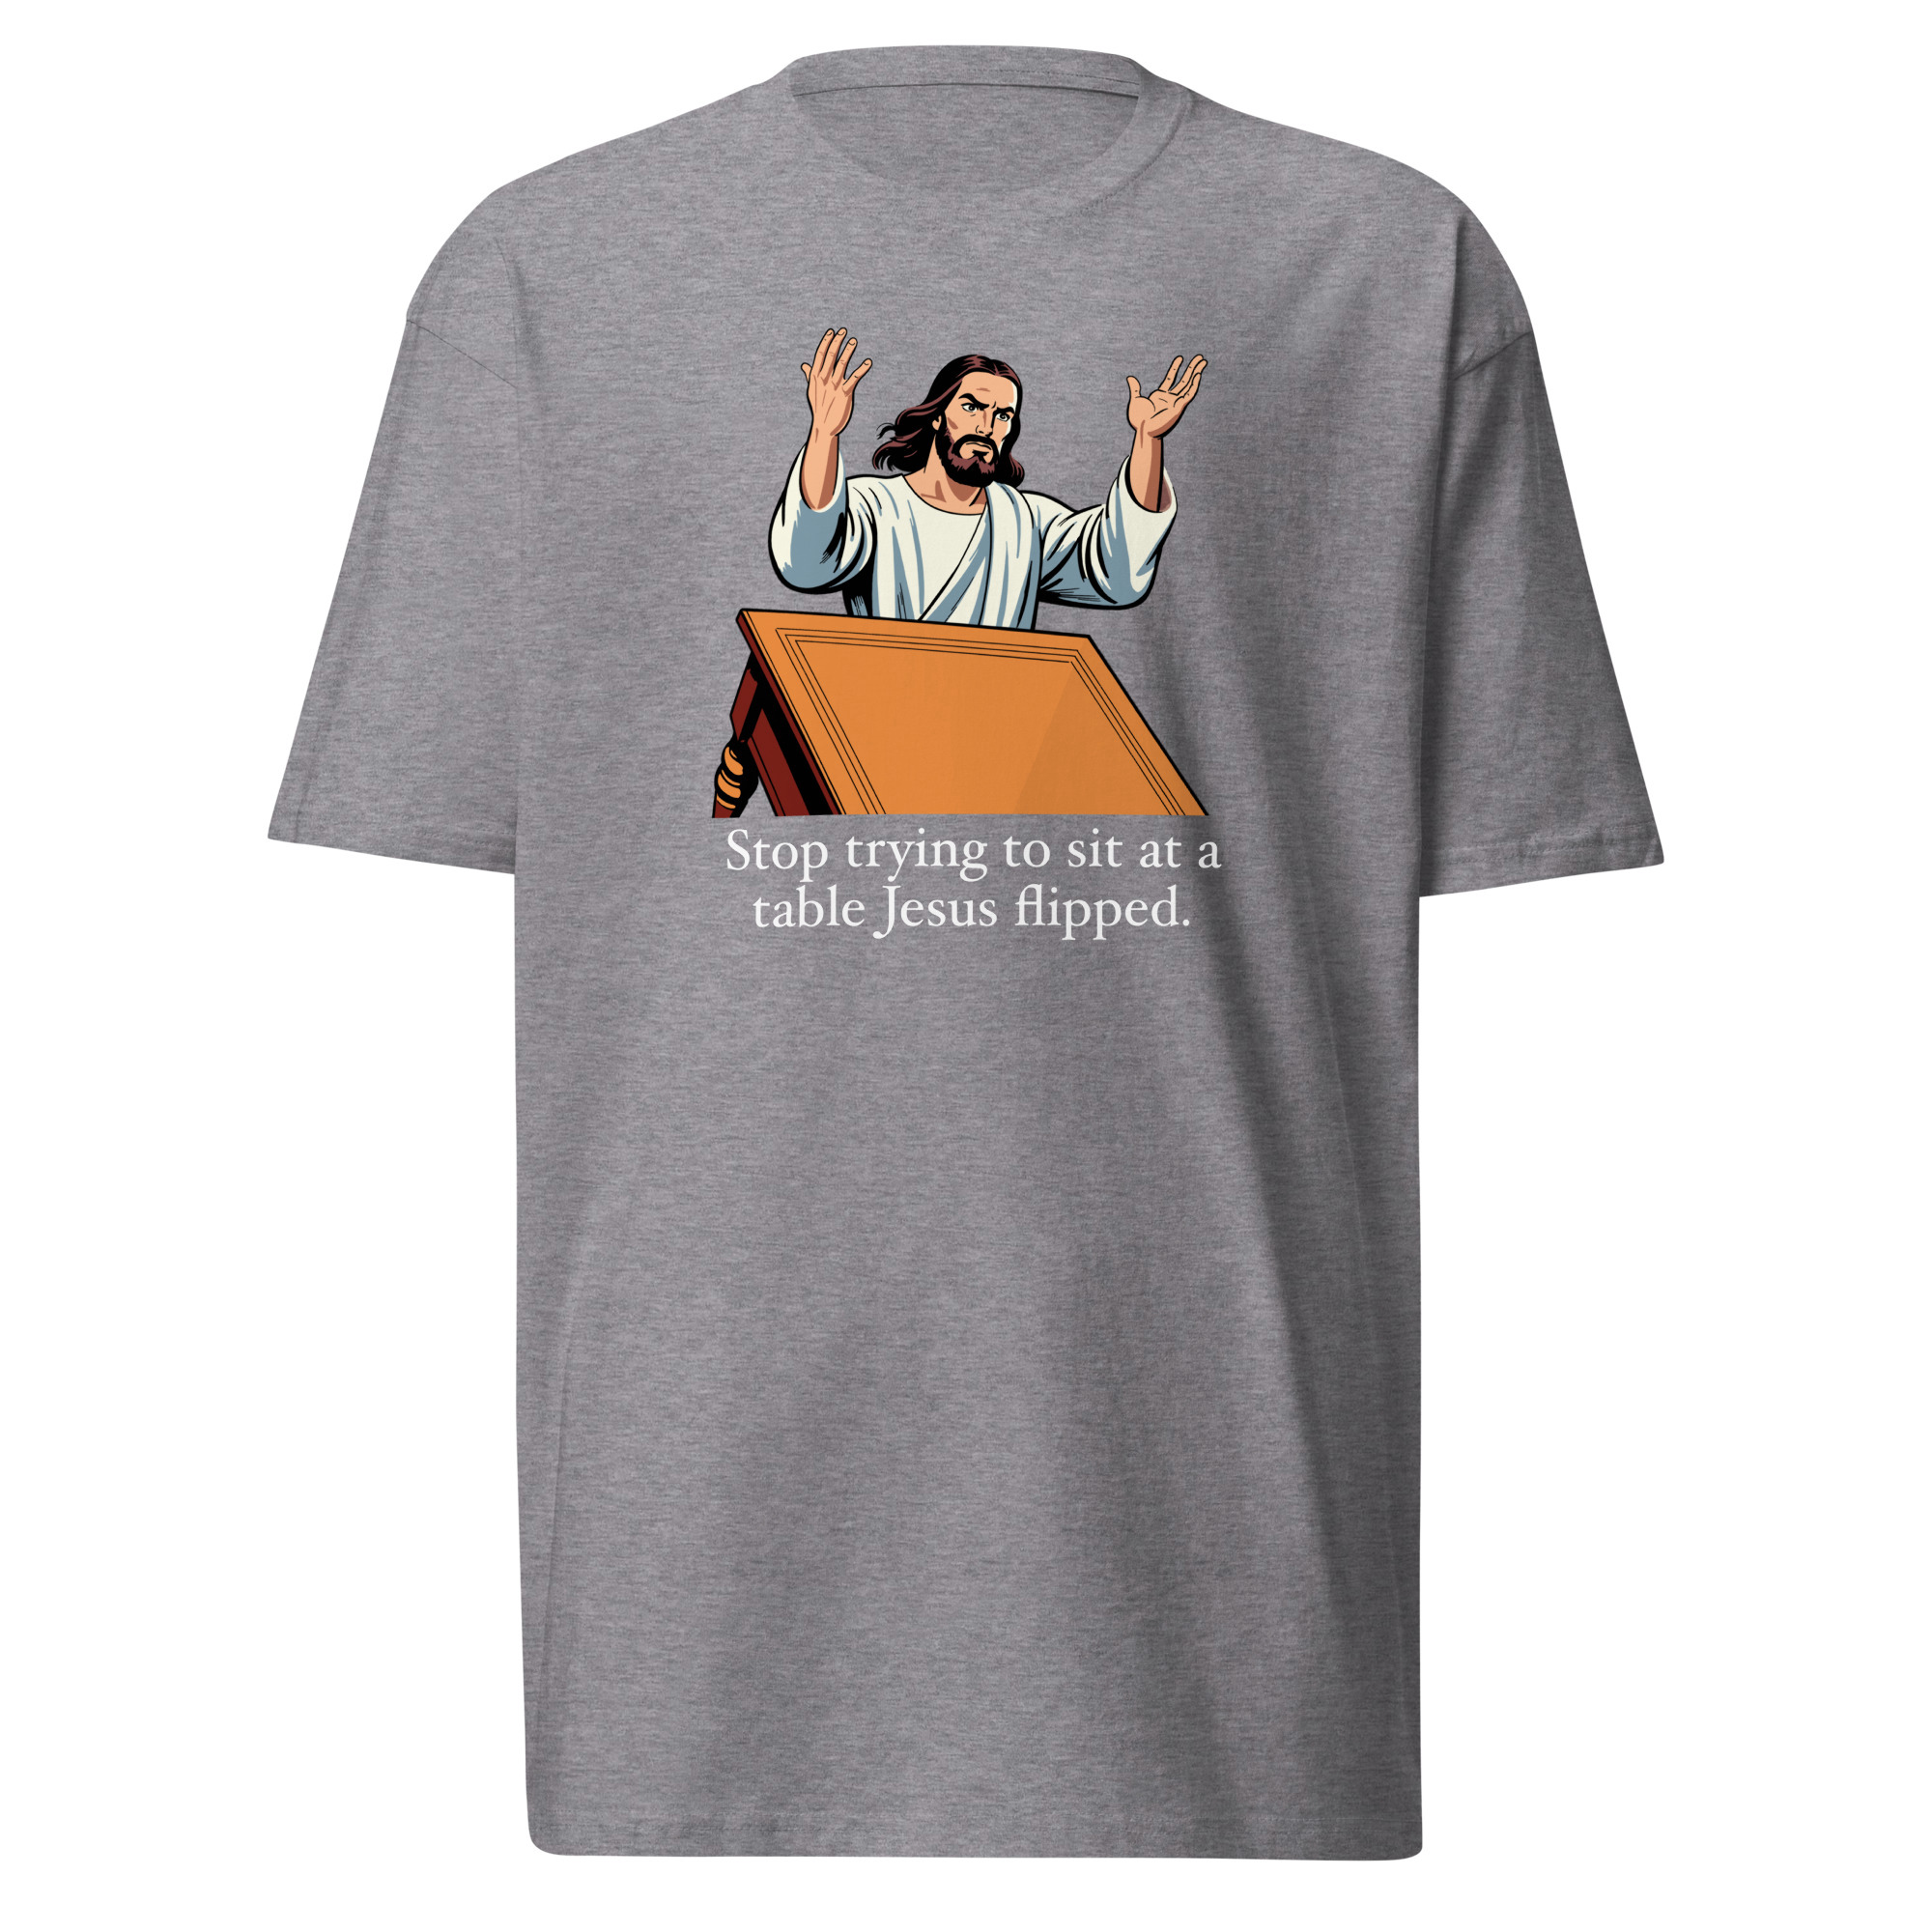 Stop trying to sit at a table Jesus flipped T-Shirt - Carbon Grey / M